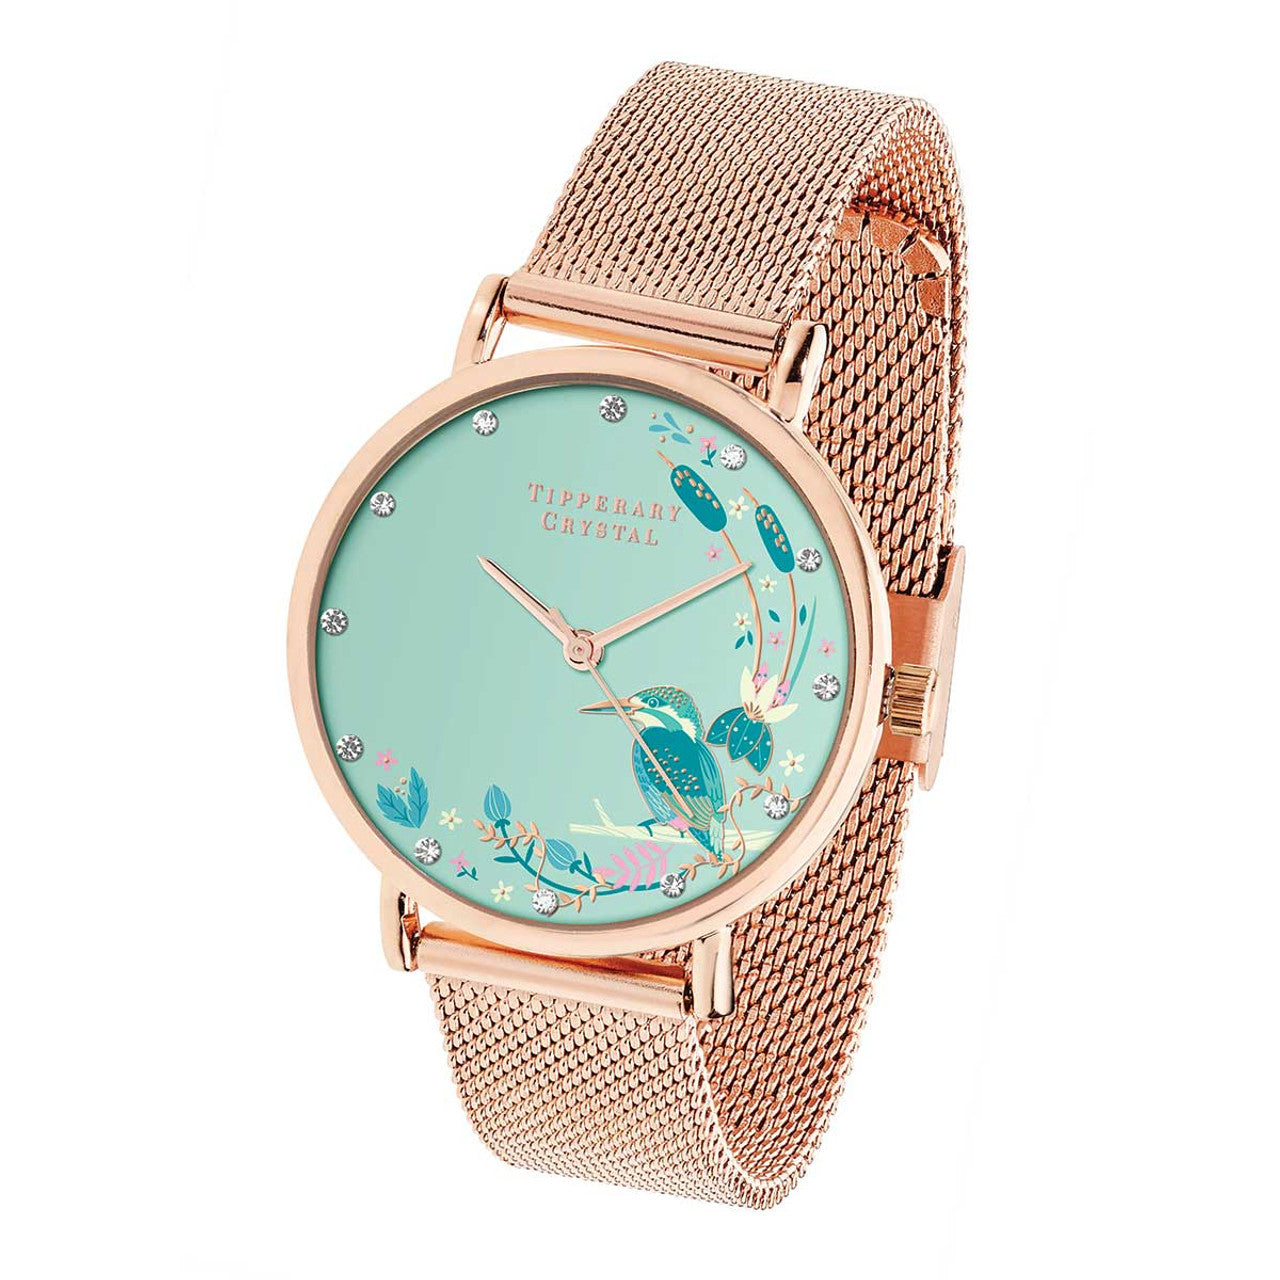 Tipperary Crystal Kingfisher Rose Gold Birdy Watch  The Birdy Collection is a vibrant collection of rose gold watches showcasing the Birdy designs. The watches feature an array of Irish garden birds in an enchanted garden setting, embellished with rose gold detailing and crystal insets.